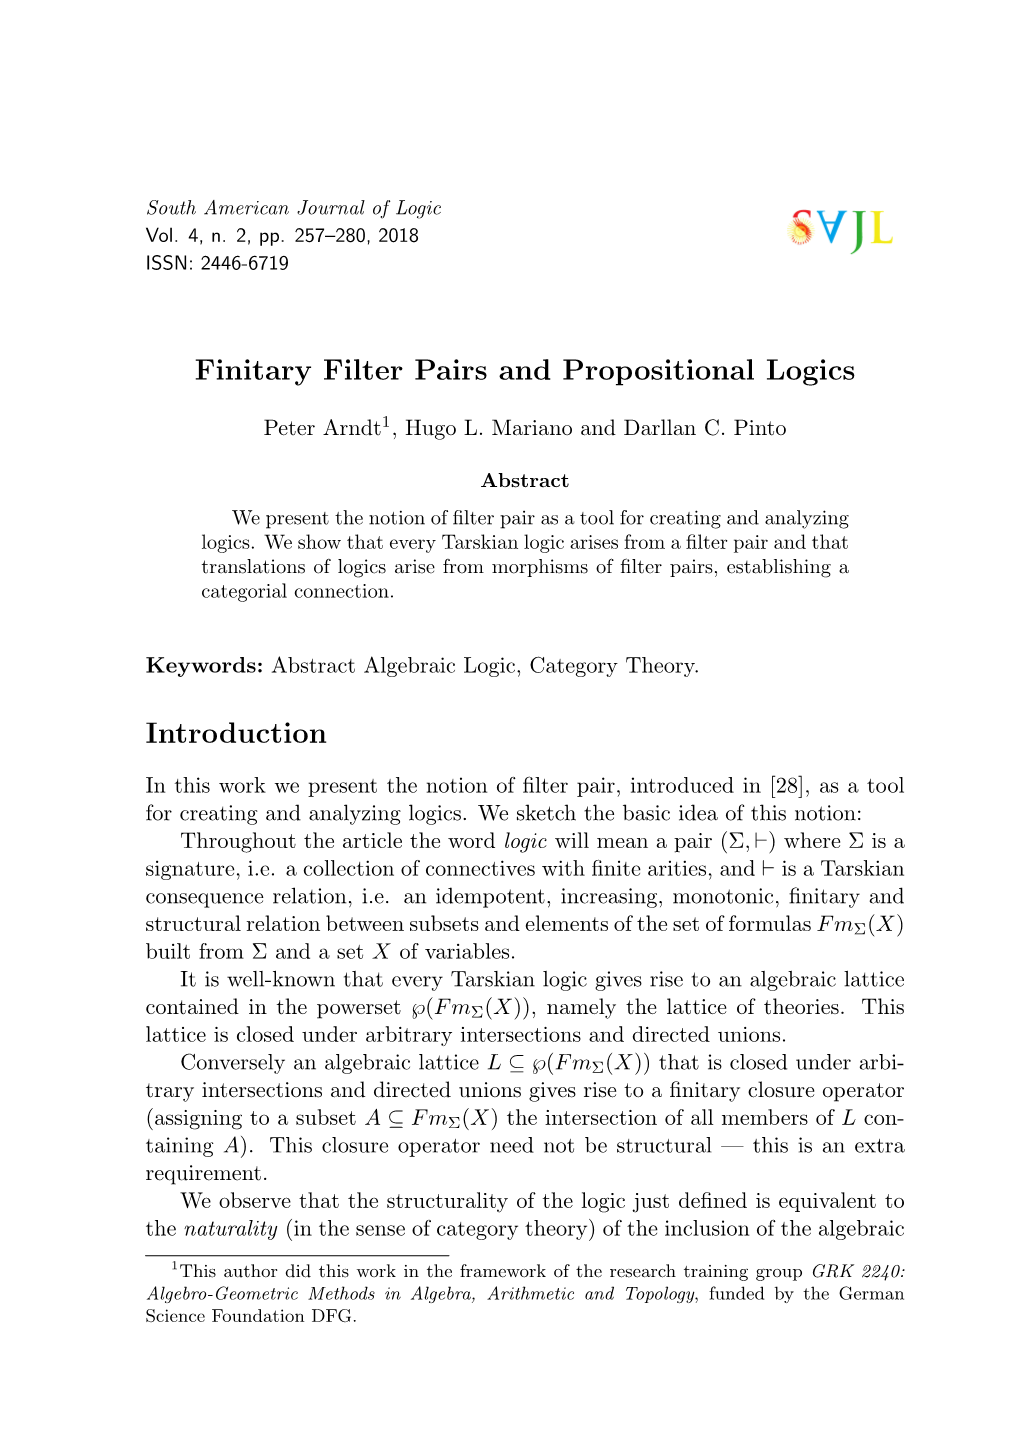 Finitary Filter Pairs and Propositional Logics